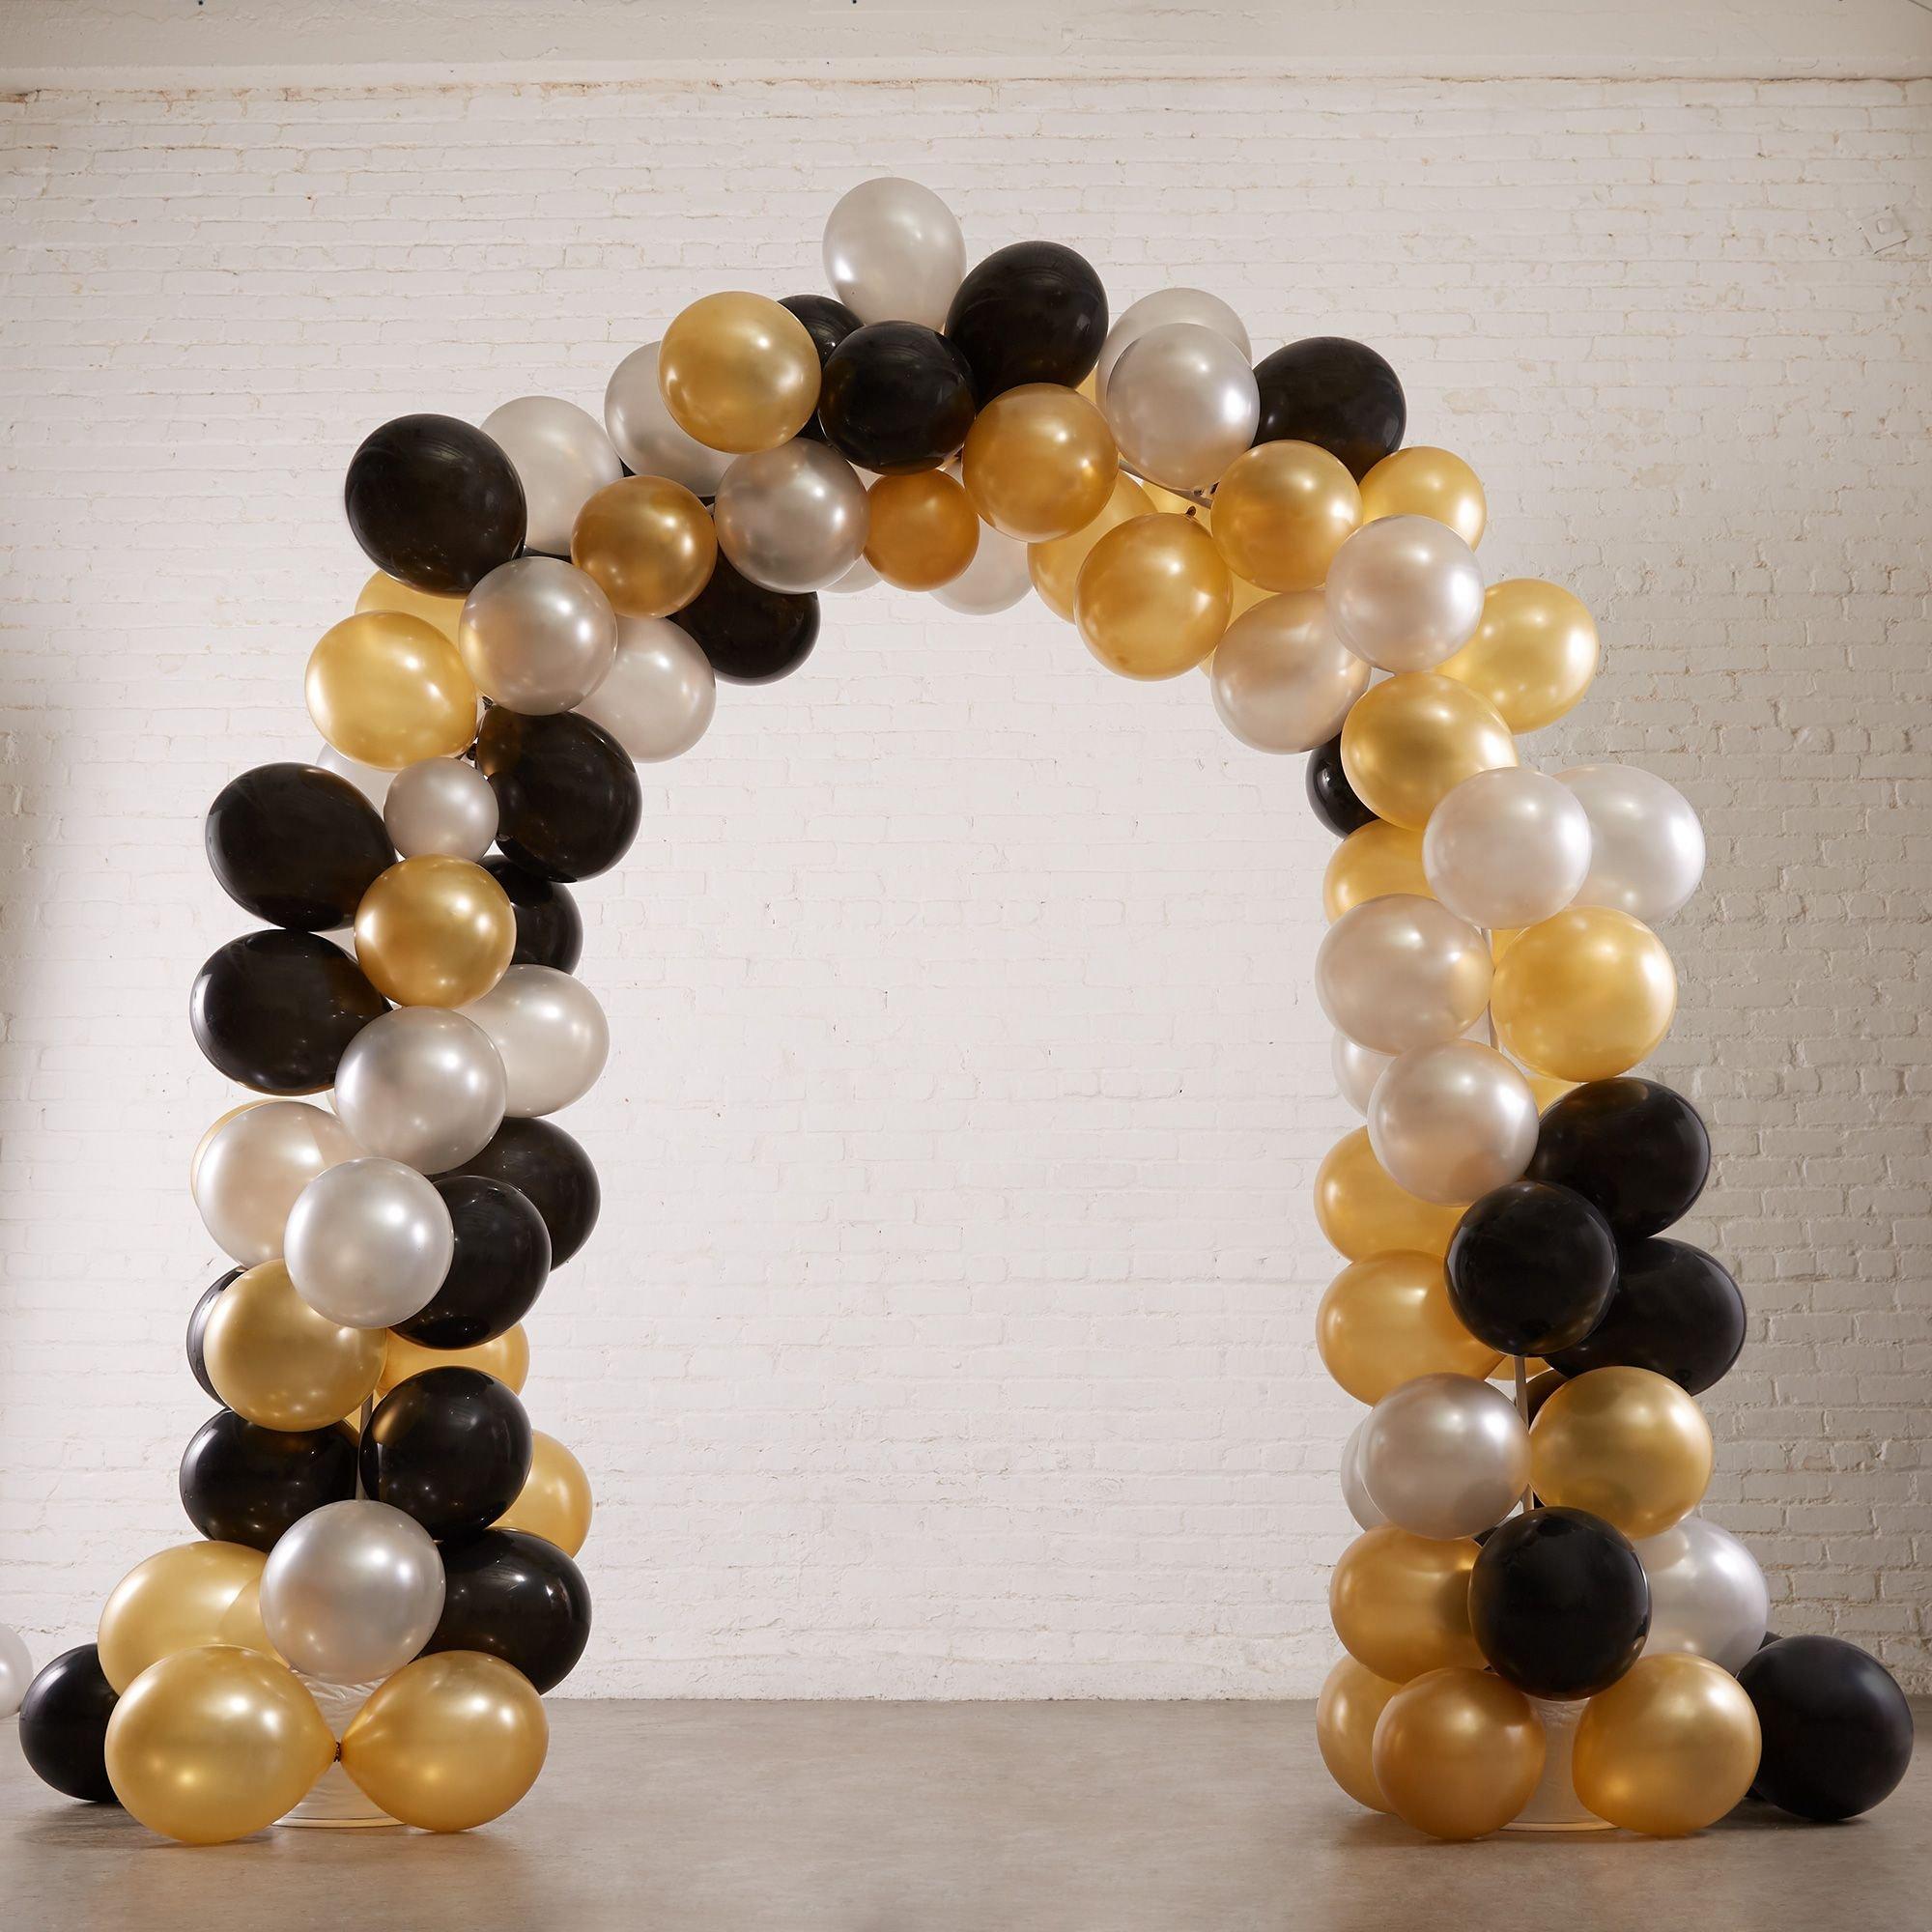 Balloon Arch with Black, Gold, Silver and White Balloons